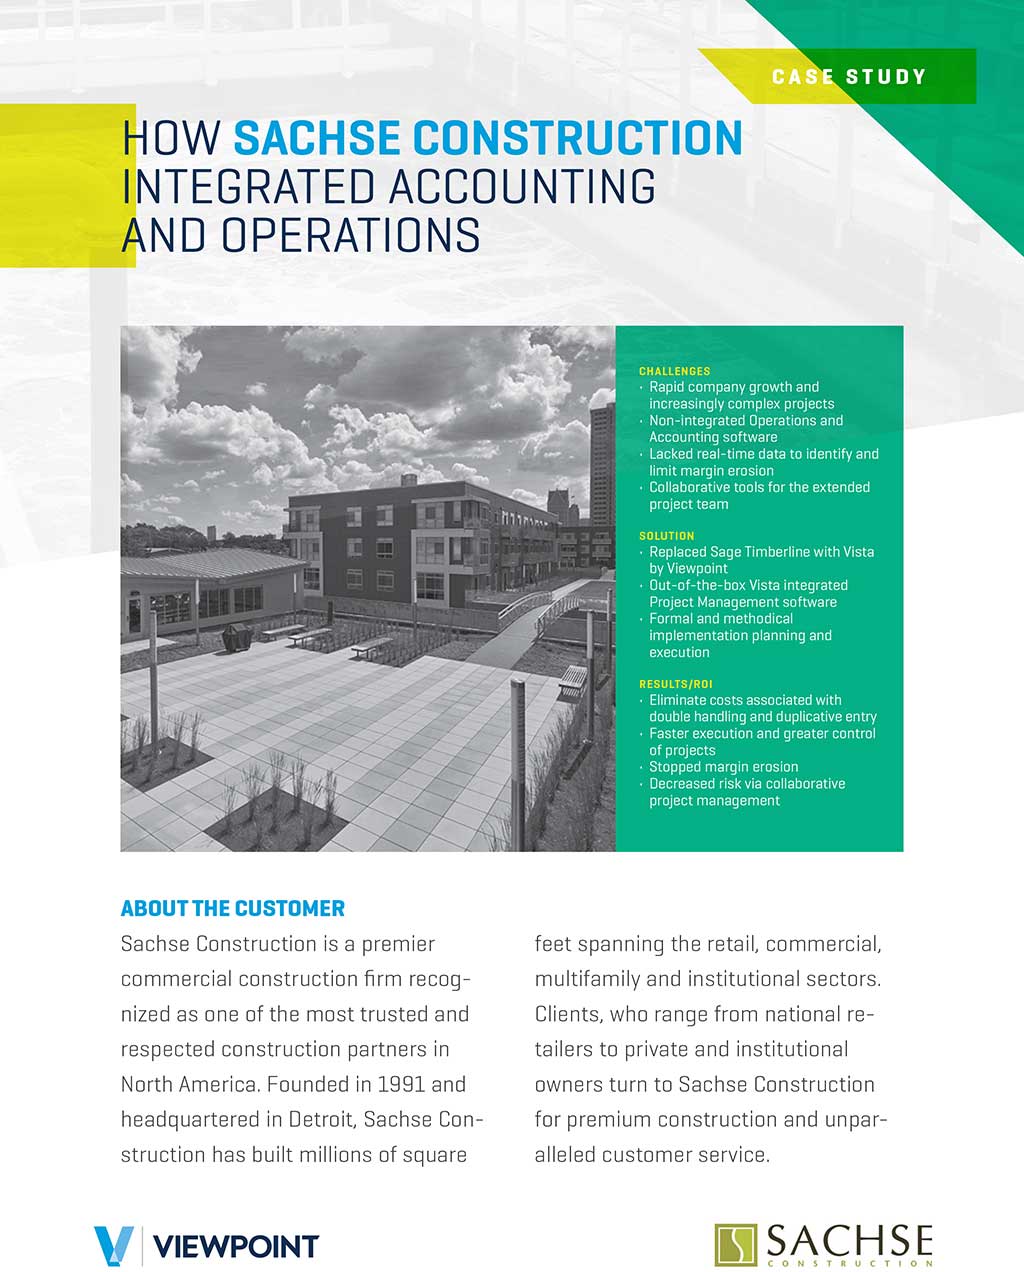 Free Success Story - Read How a Construction Firm Integrated Accounting and Operations